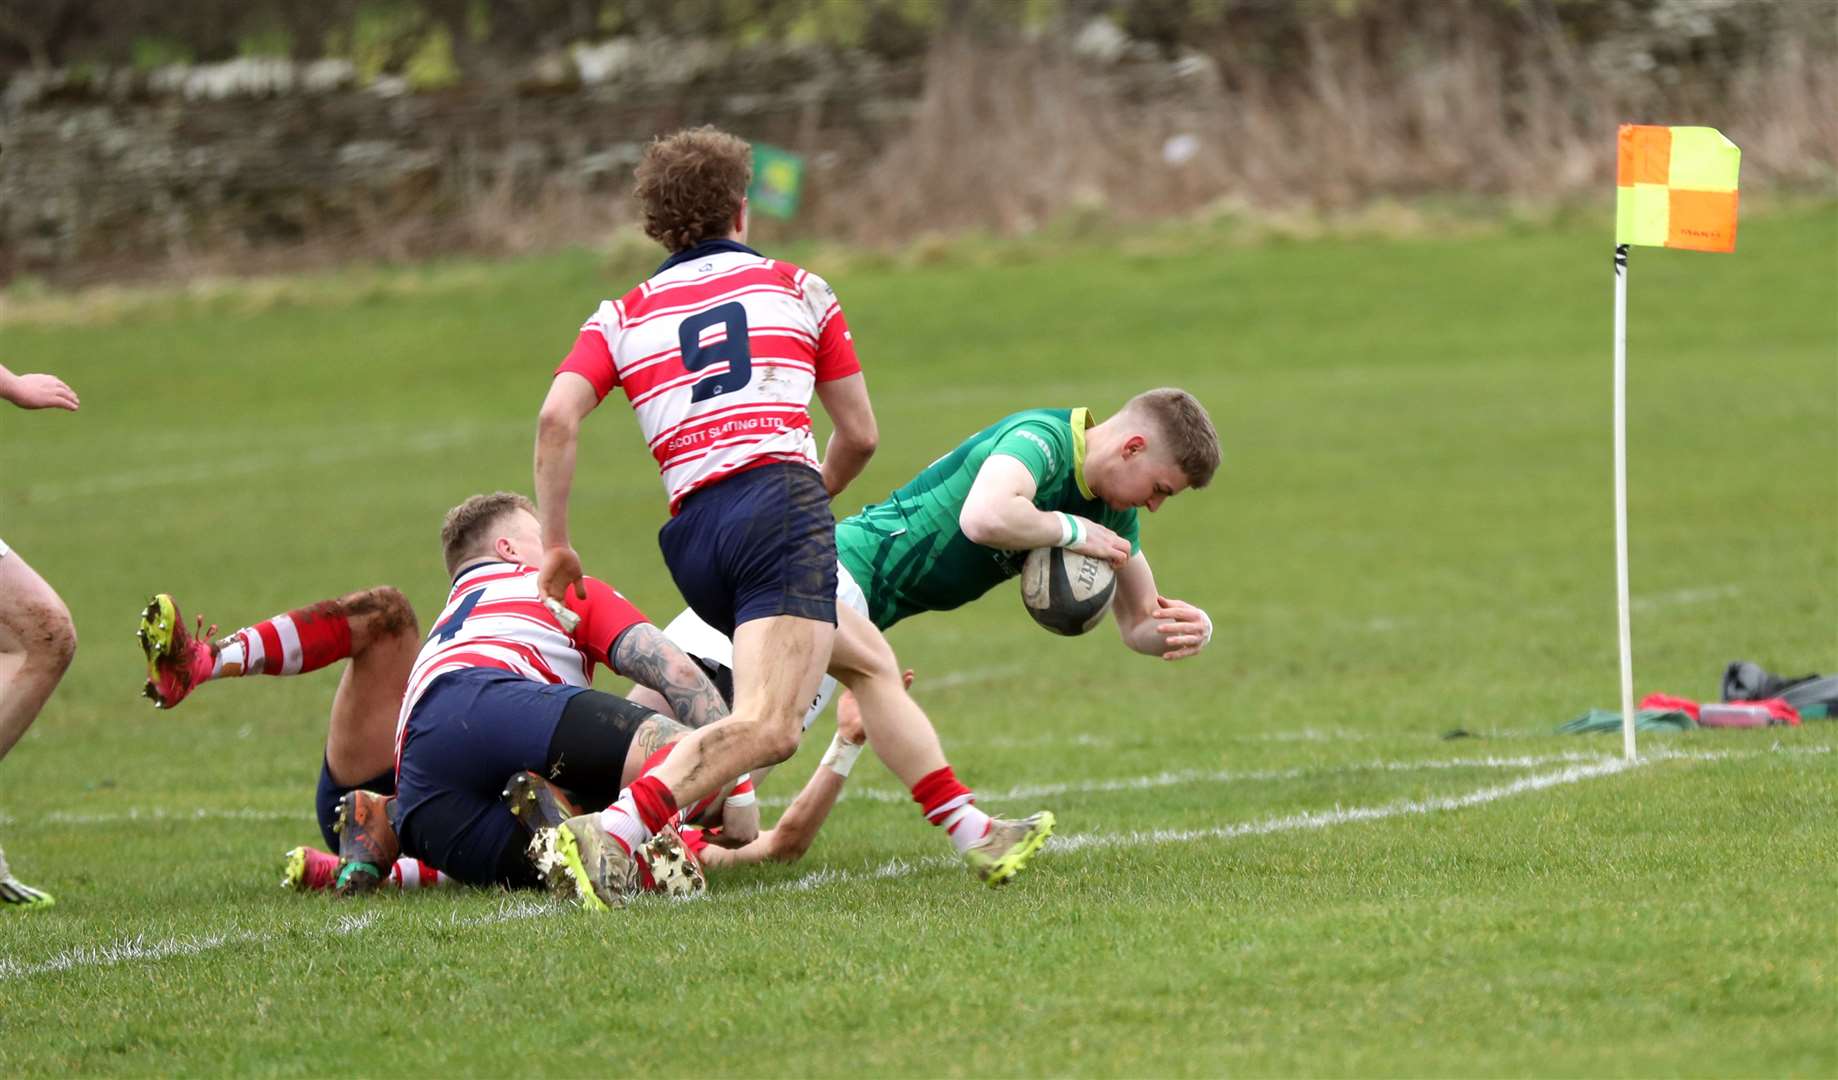 Drew Mathieson goes over for the Greens' third try against Moray at Millbank. Picture: James Gunn